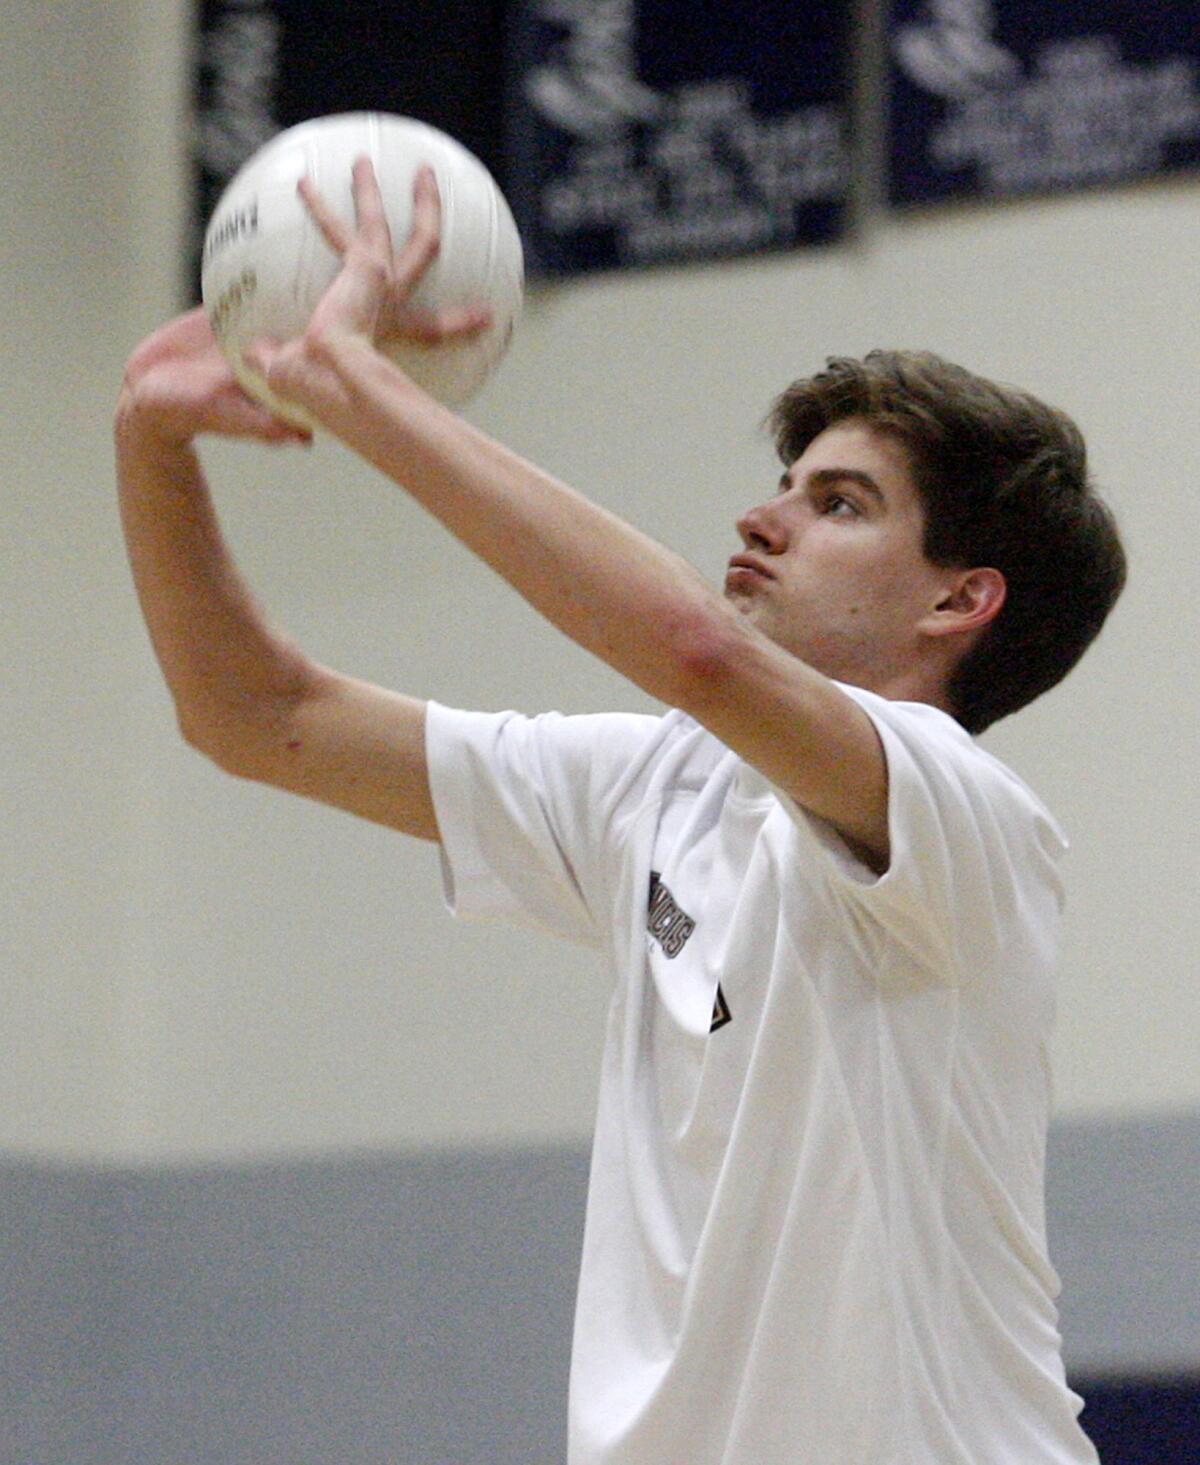 FILE PHOTO: St. Francis' Charles McCarthy sets the ball from the back line against Flintridge Prep in a non-league boys volleyball match on Monday, March 4, 2013. The senior outside hitter was named to Mission League's first team.